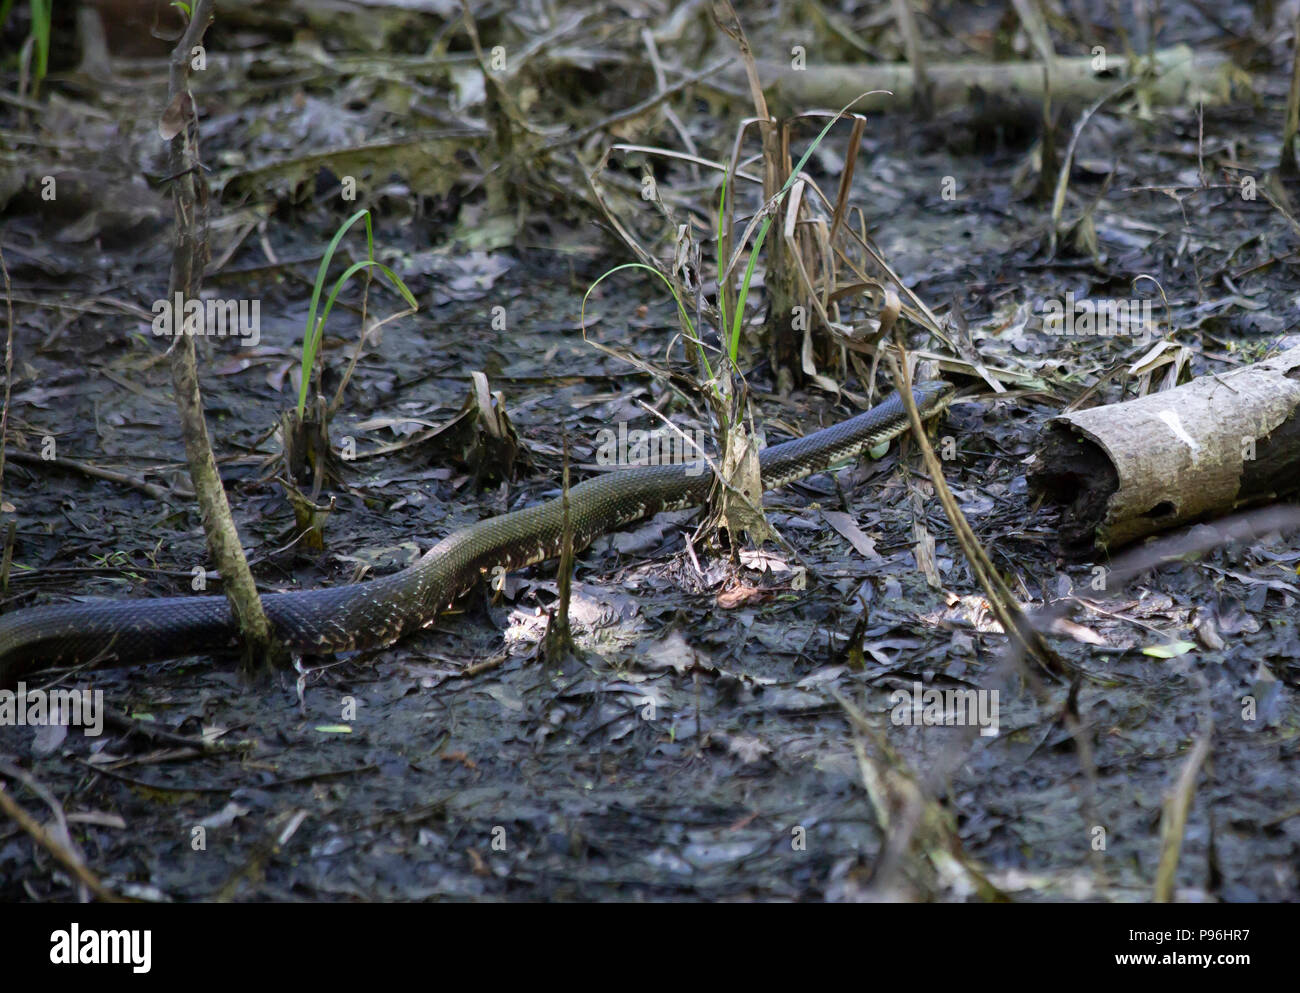 Western rat snake (Pantherophis obsoletus), also known as a chicken snake, crawling through marshland Stock Photo